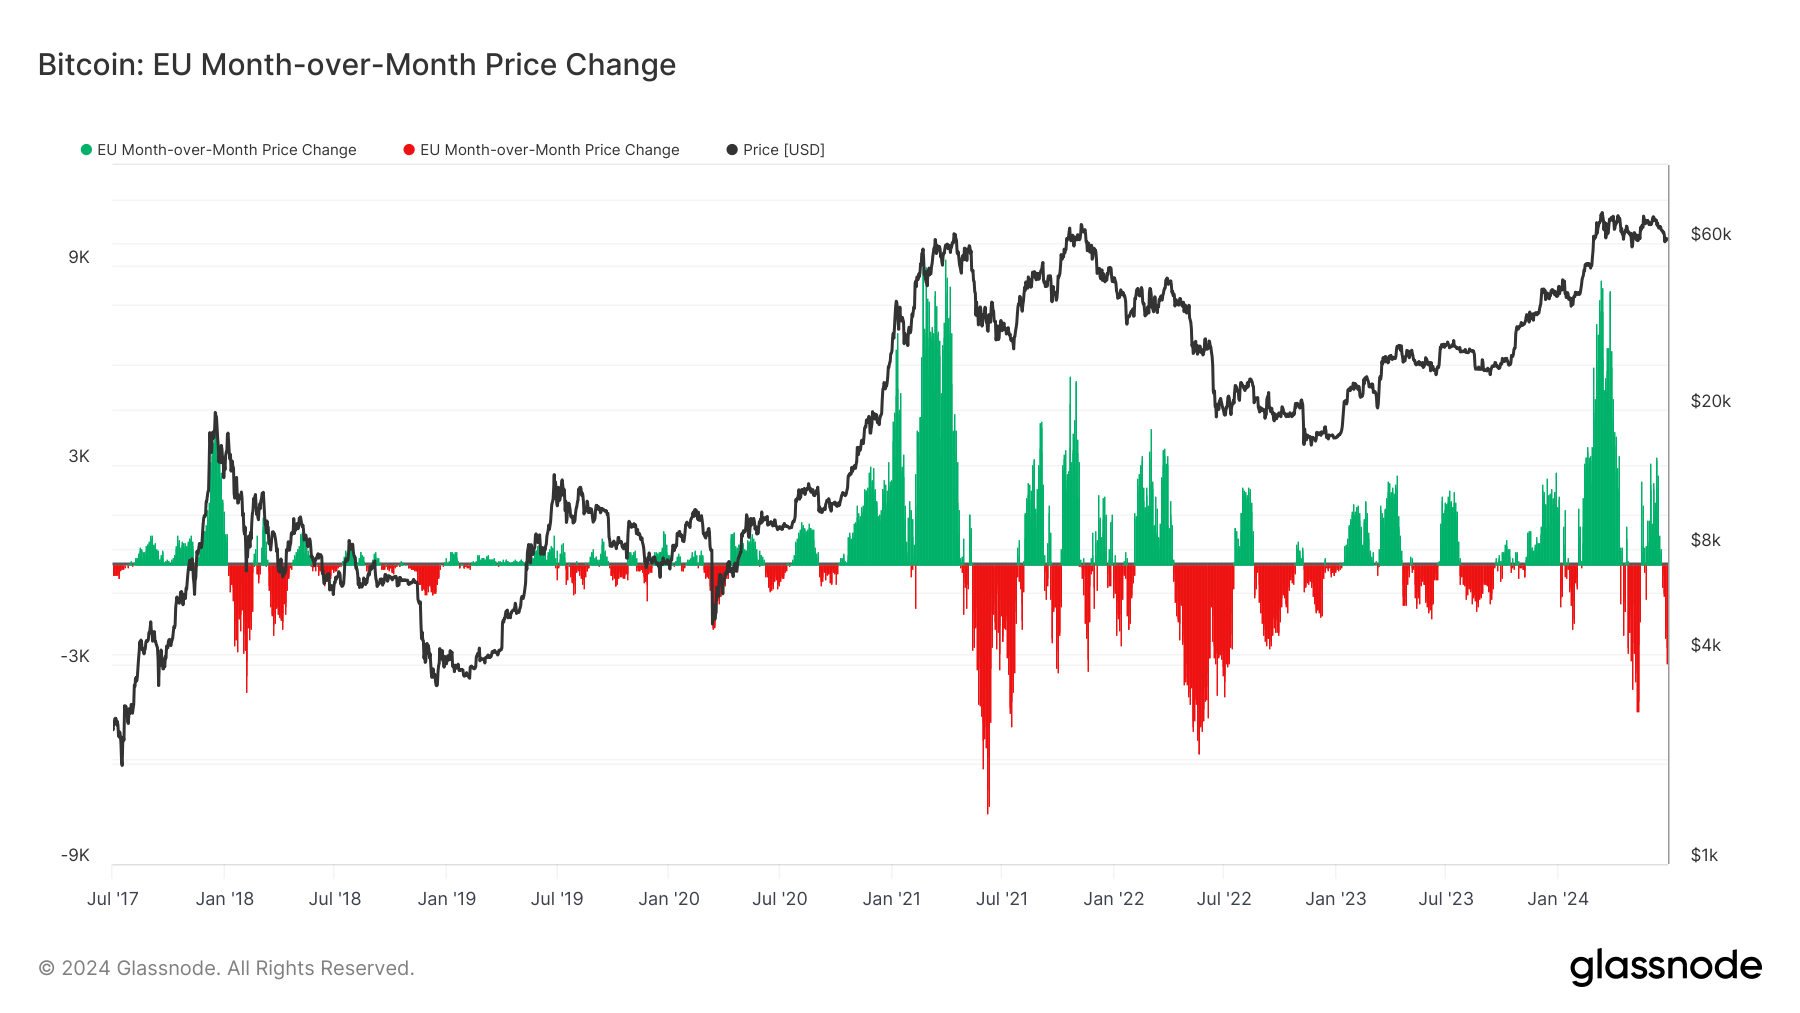 Bitcoin: EU Month Over Month Price Change: (Source: Glassnode)